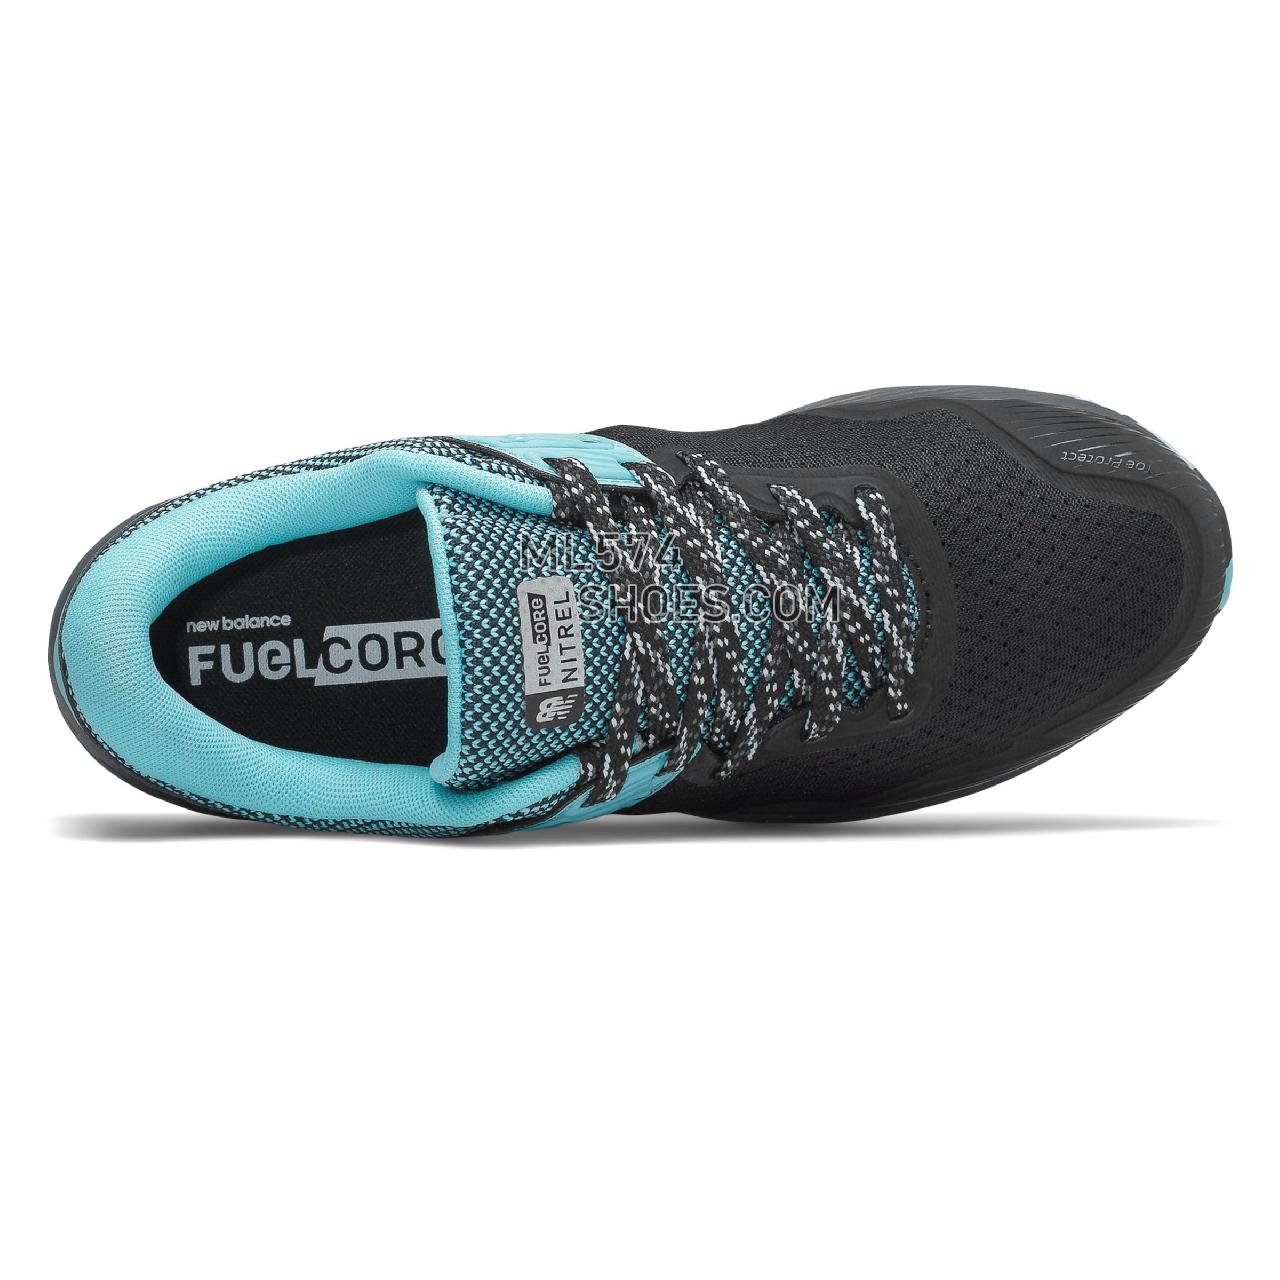 New Balance FuelCore NITREL v2 - Women's 2 - Running Black with Thunder and Enamel Blue - WTNTRLB2